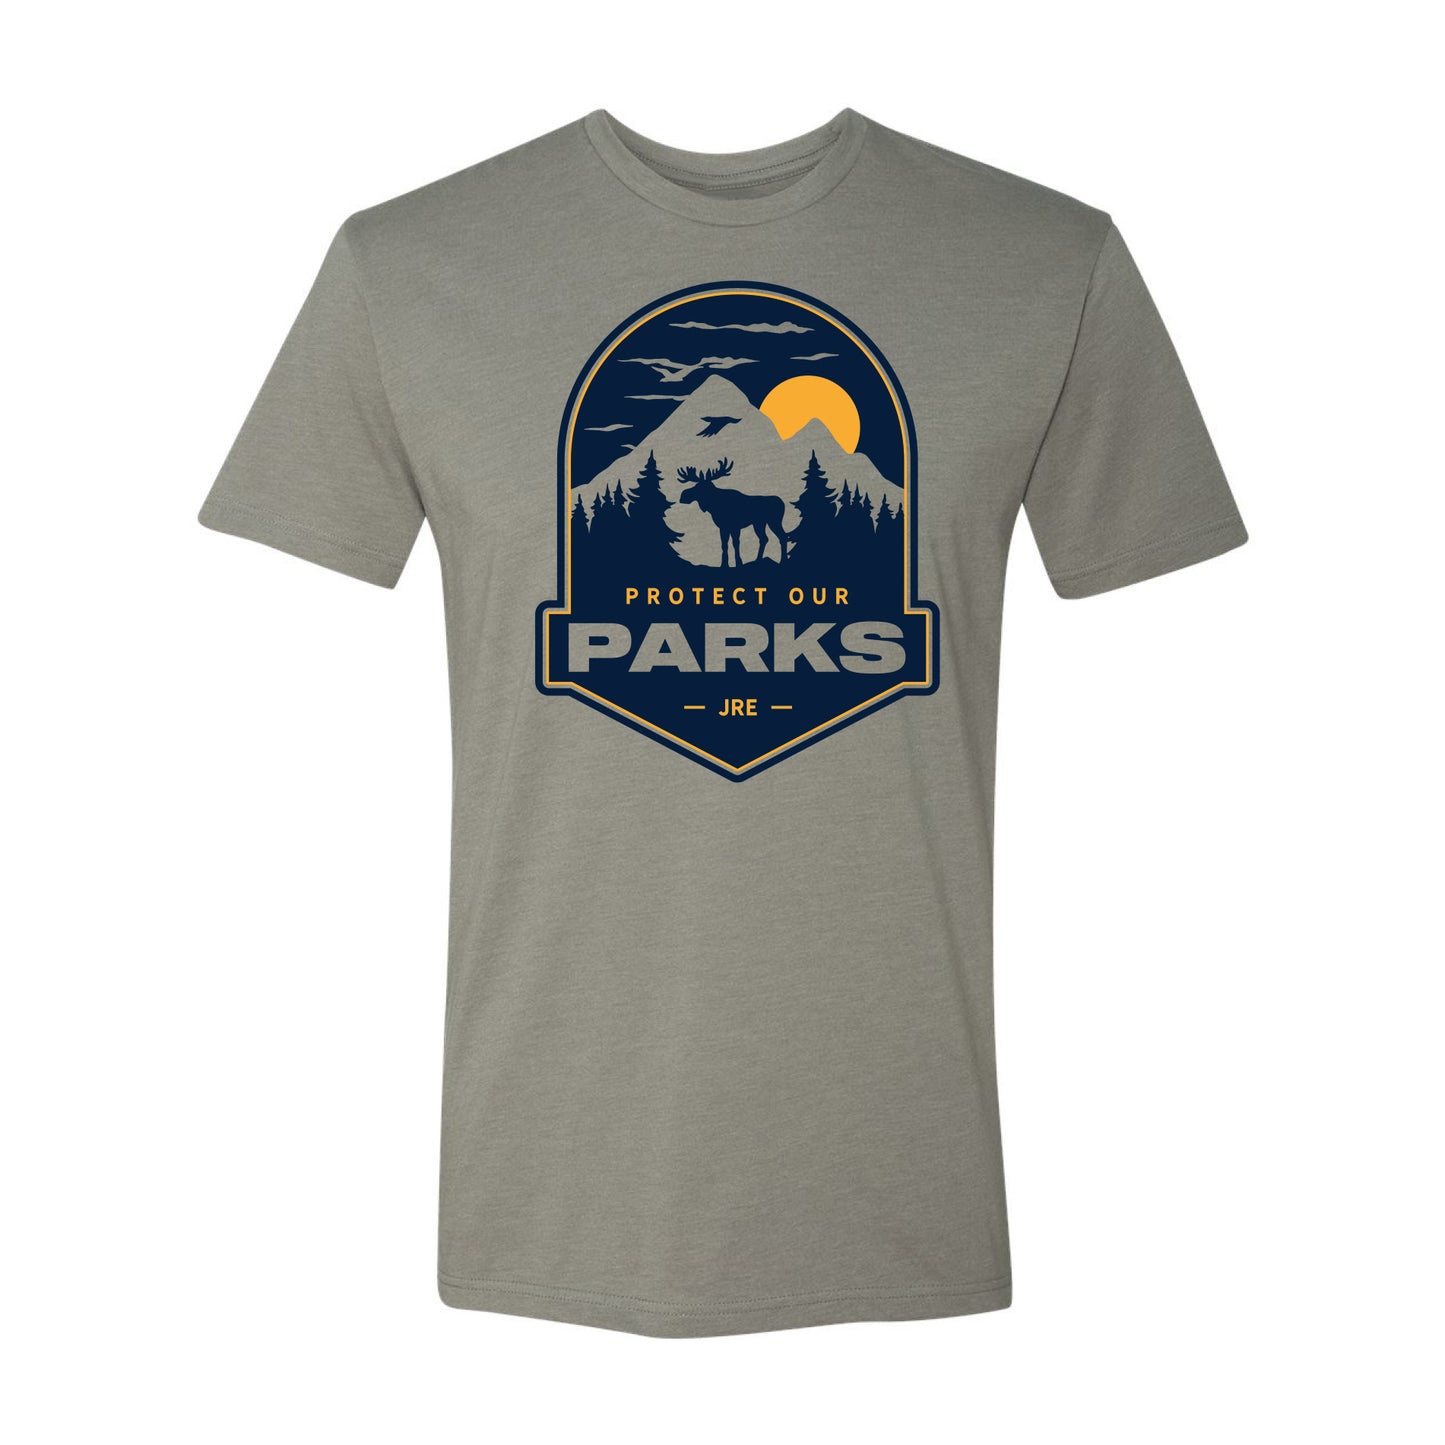 Protect Our Parks Badge Tee